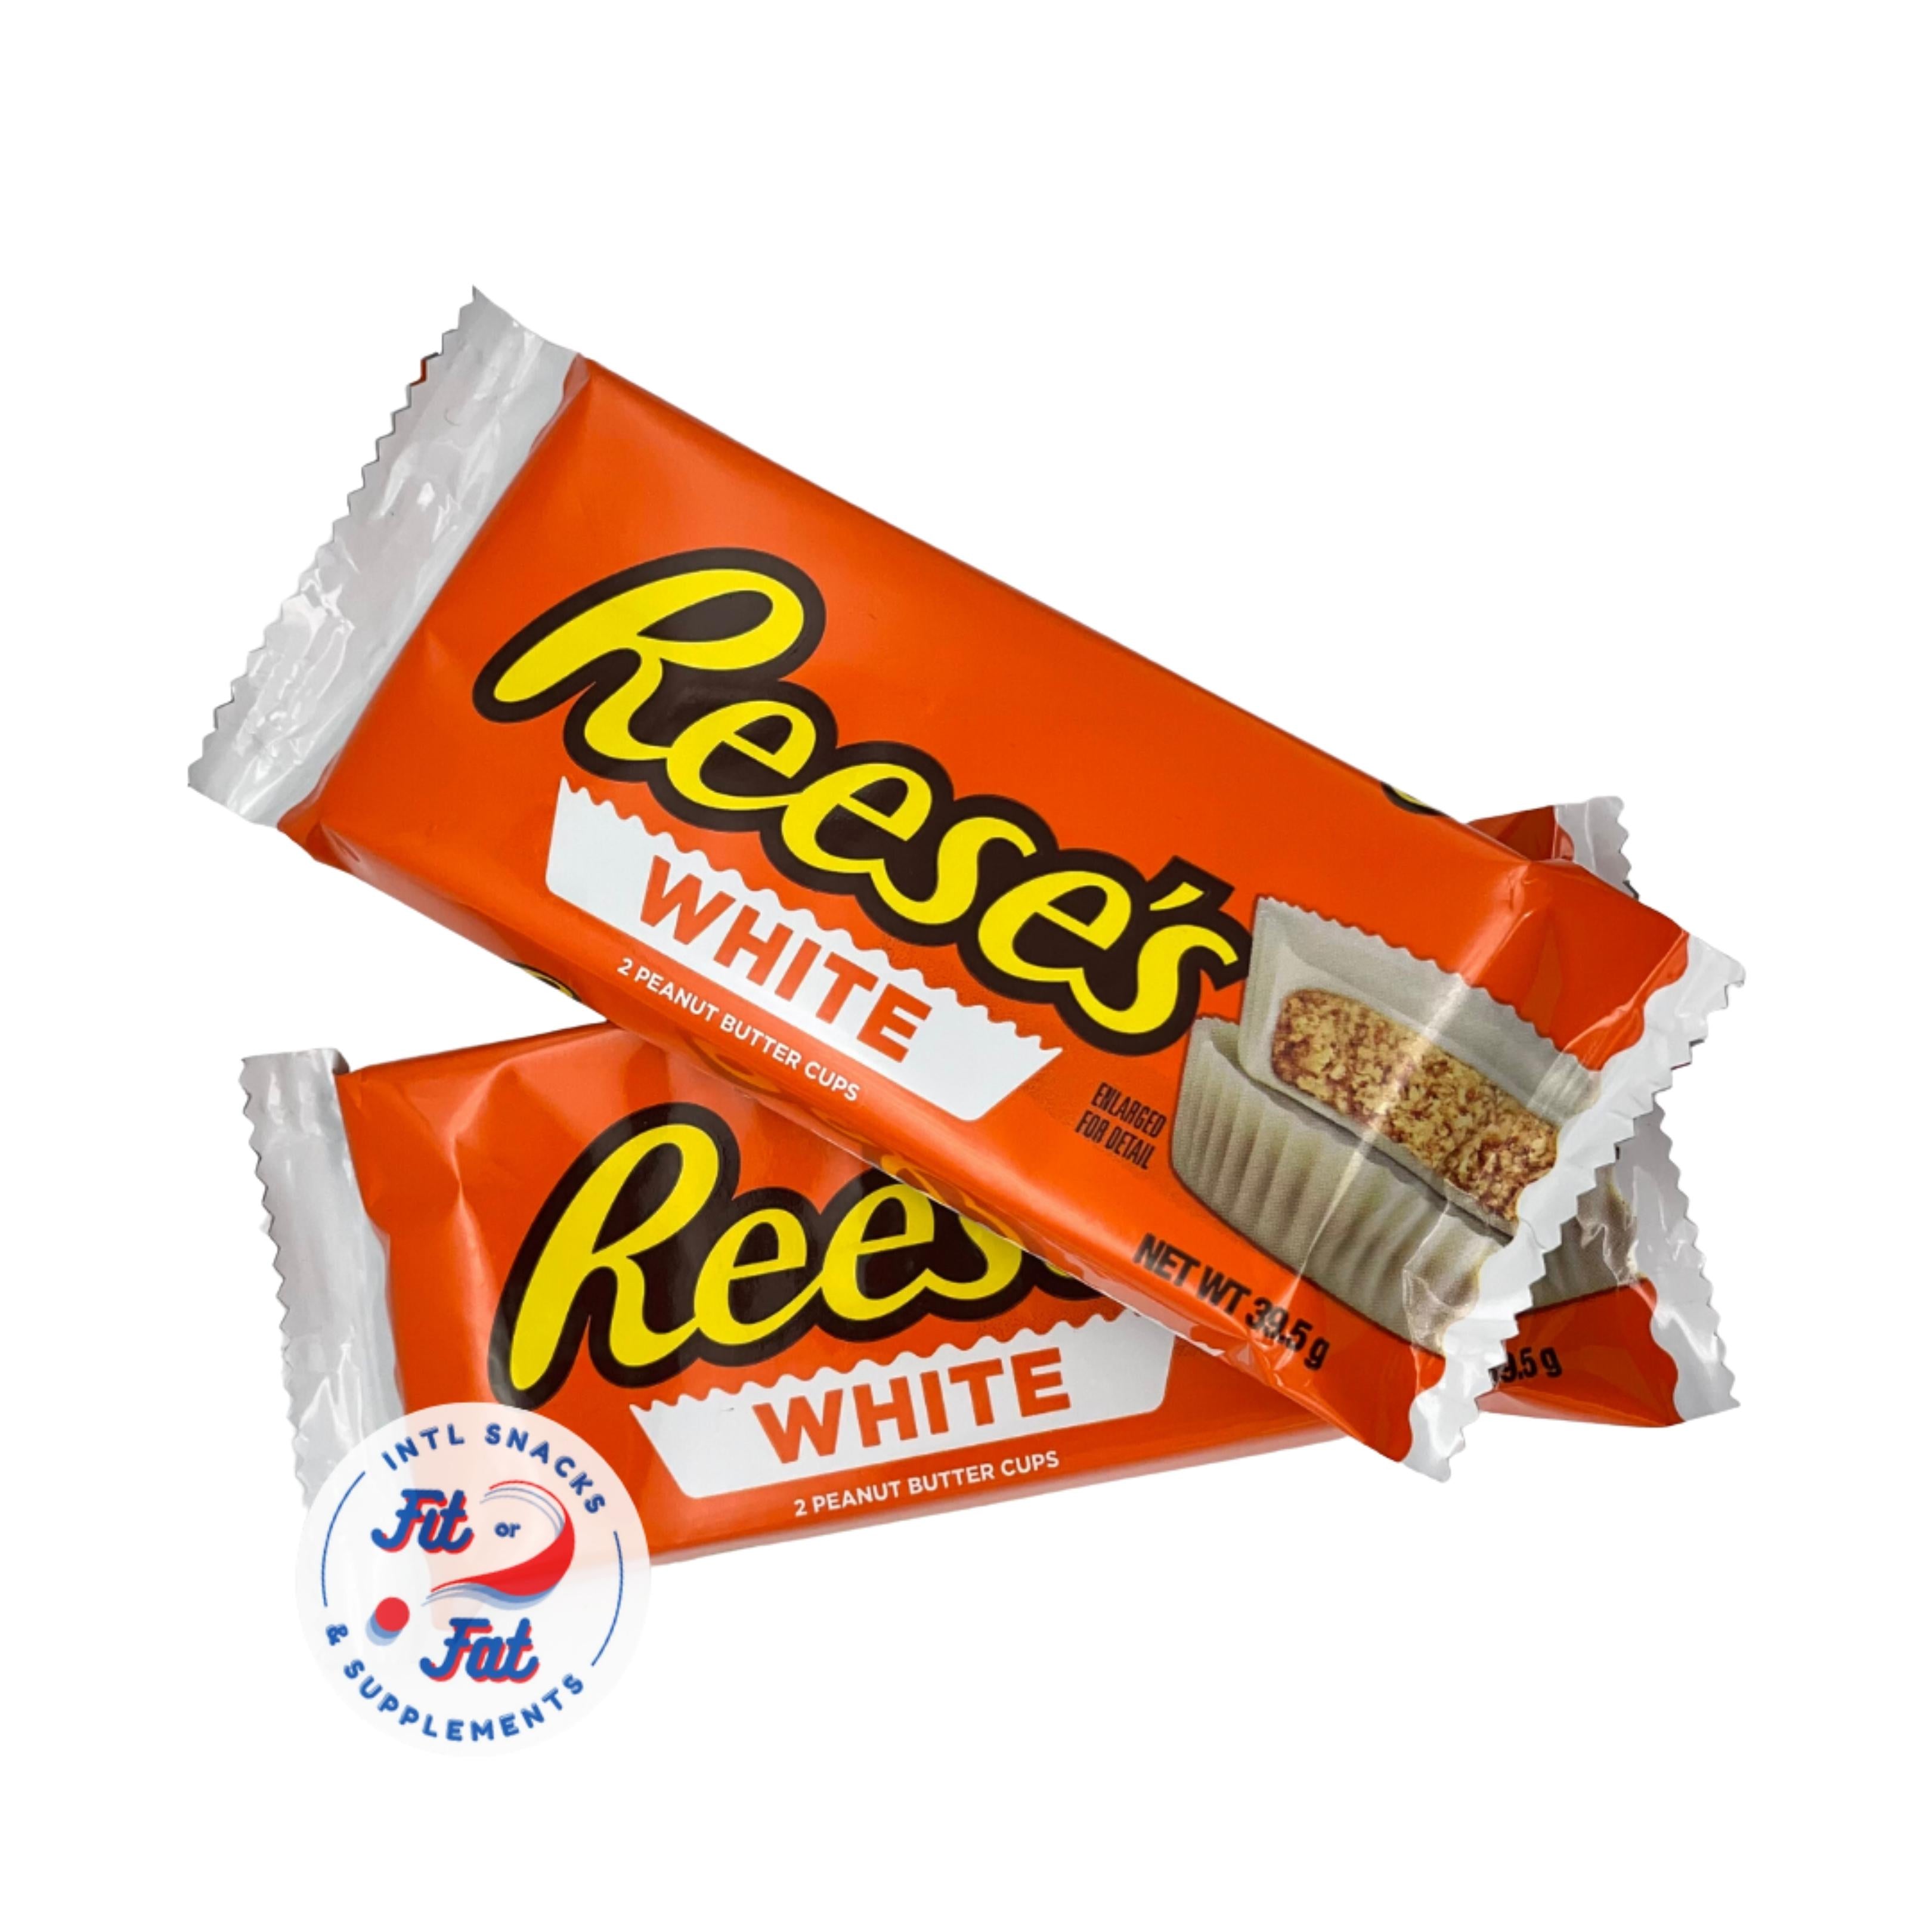 Resee's White Peanut Butter Cup